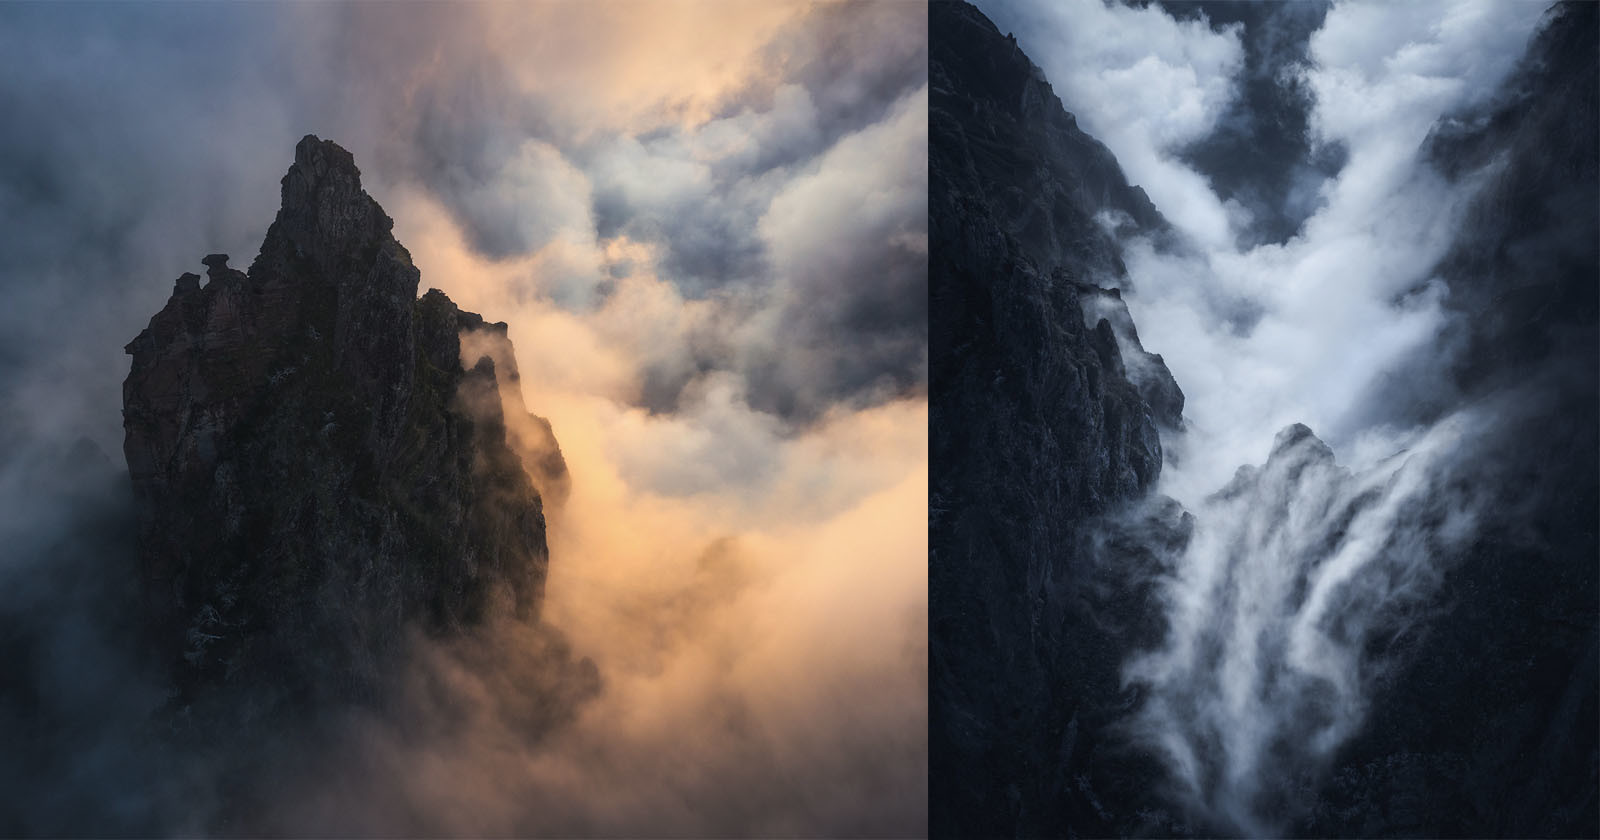 How to Find and Capture Epic Landscape Photos Above the Clouds